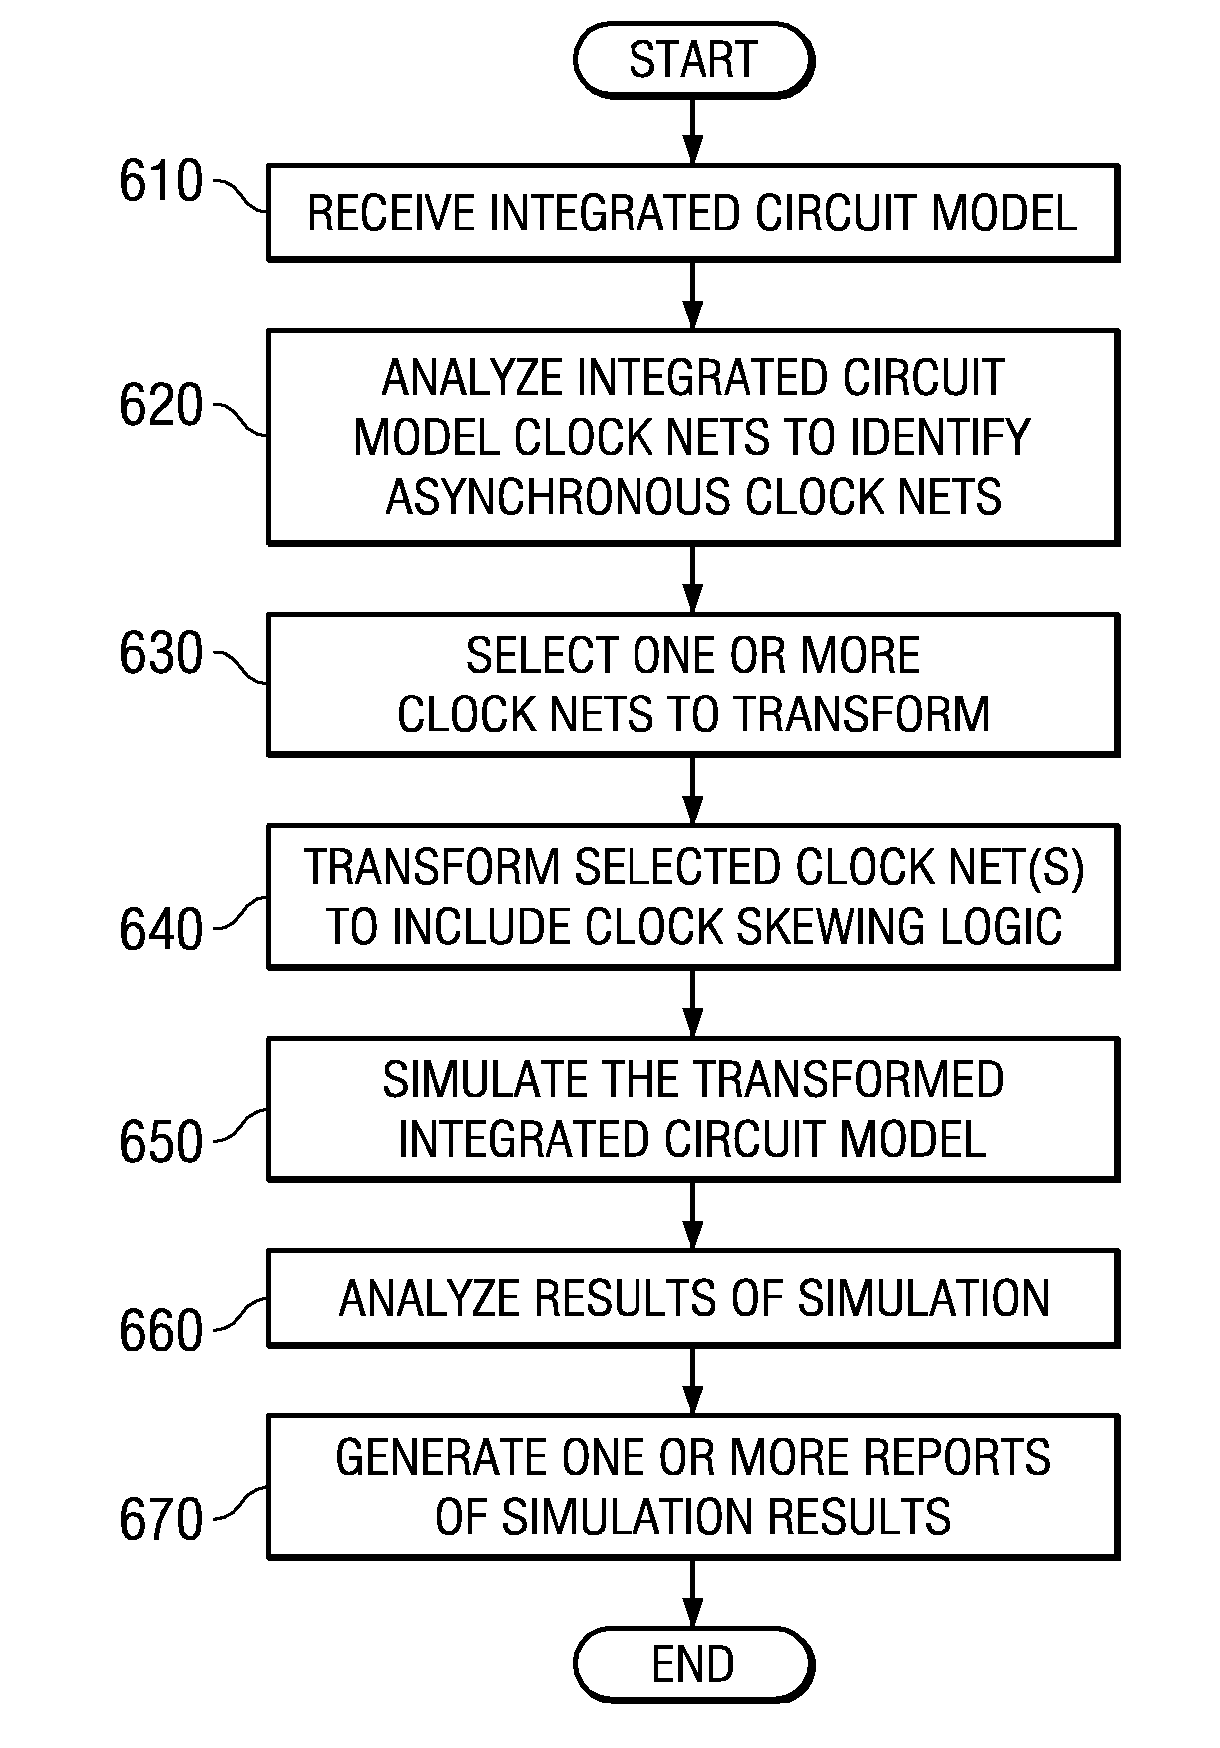 Method for asynchronous clock modeling in an integrated circuit simulation